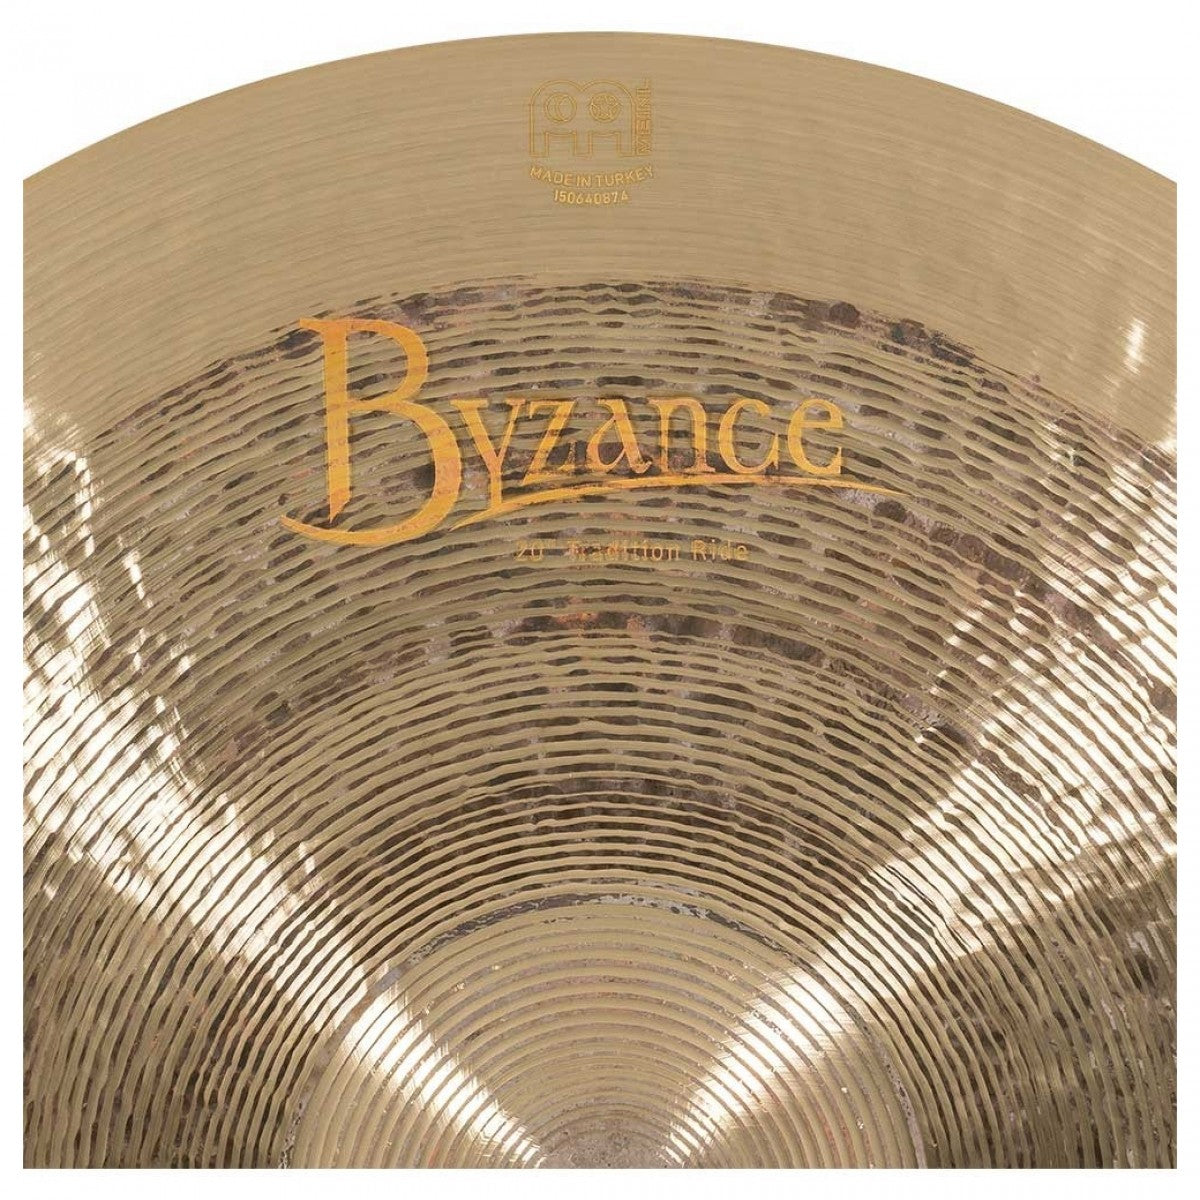 Cymbal Meinl Byzance Jazz 20" Tradition Ride - B20TRR - Việt Music